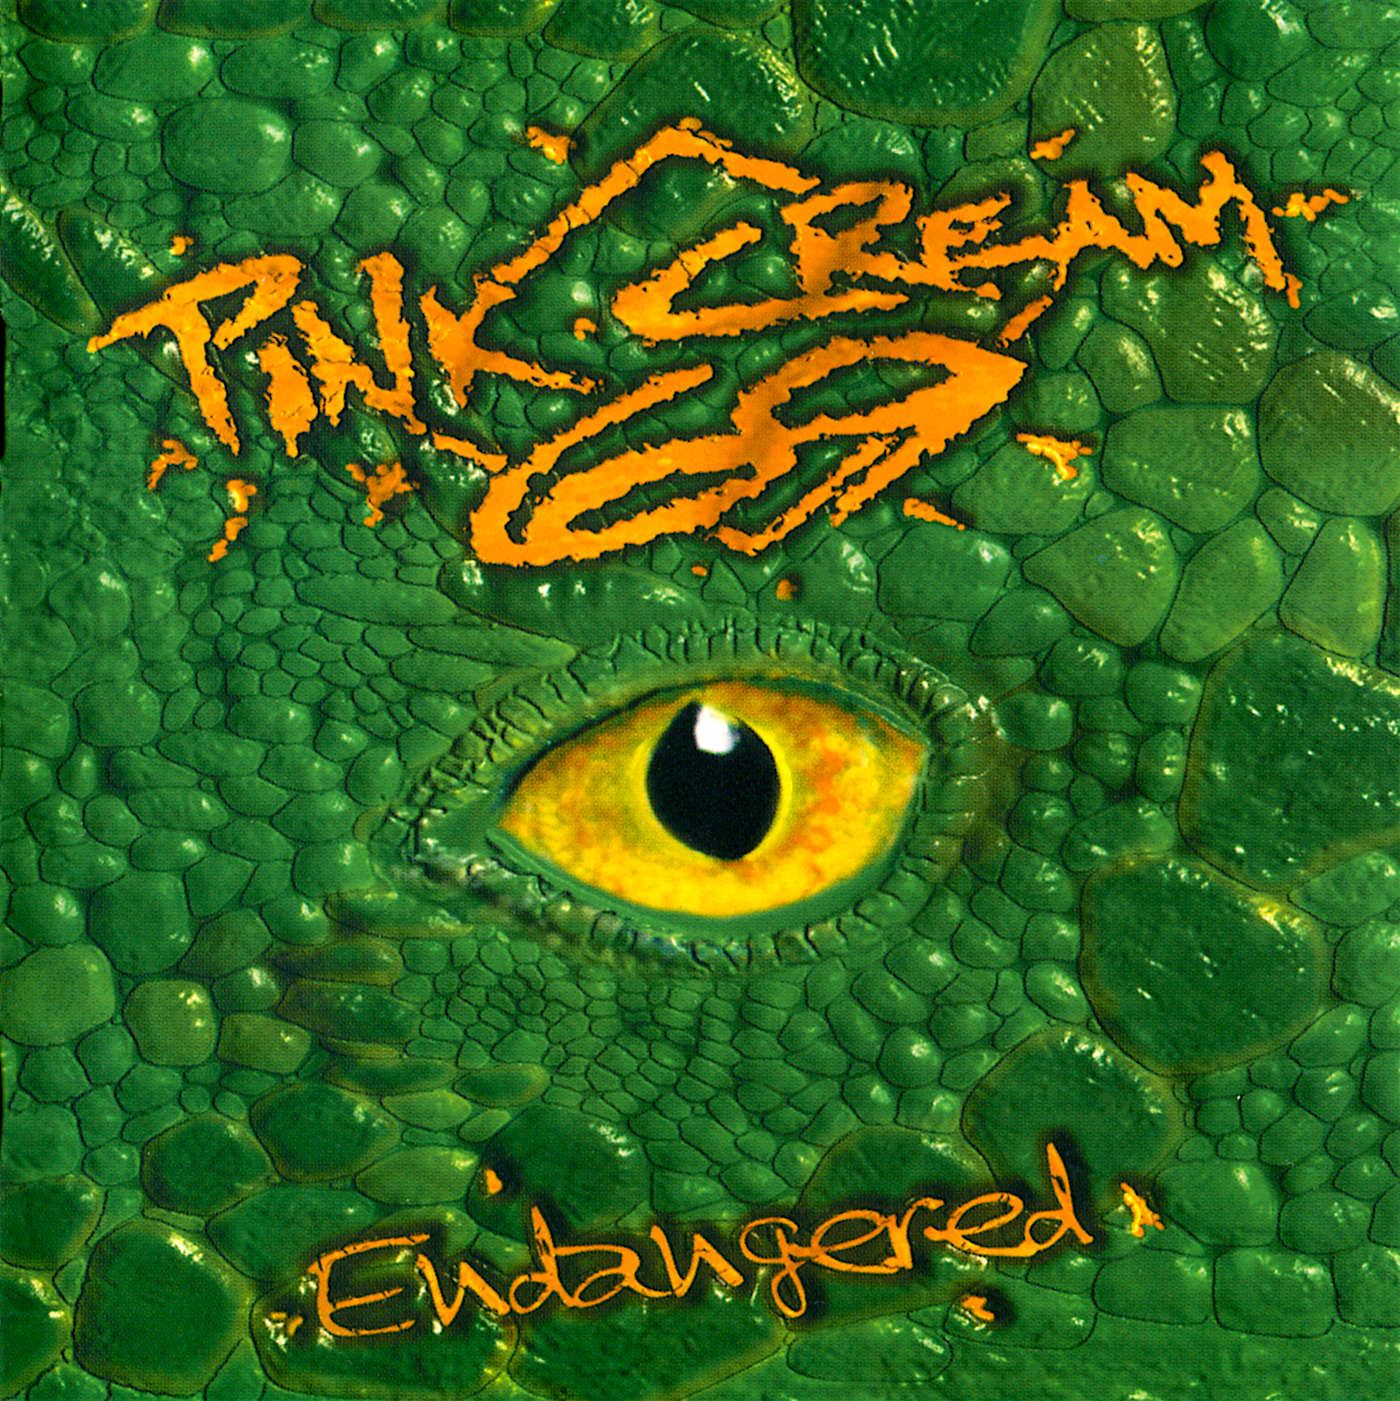 PINK CREAM 69 - Endangered cover 